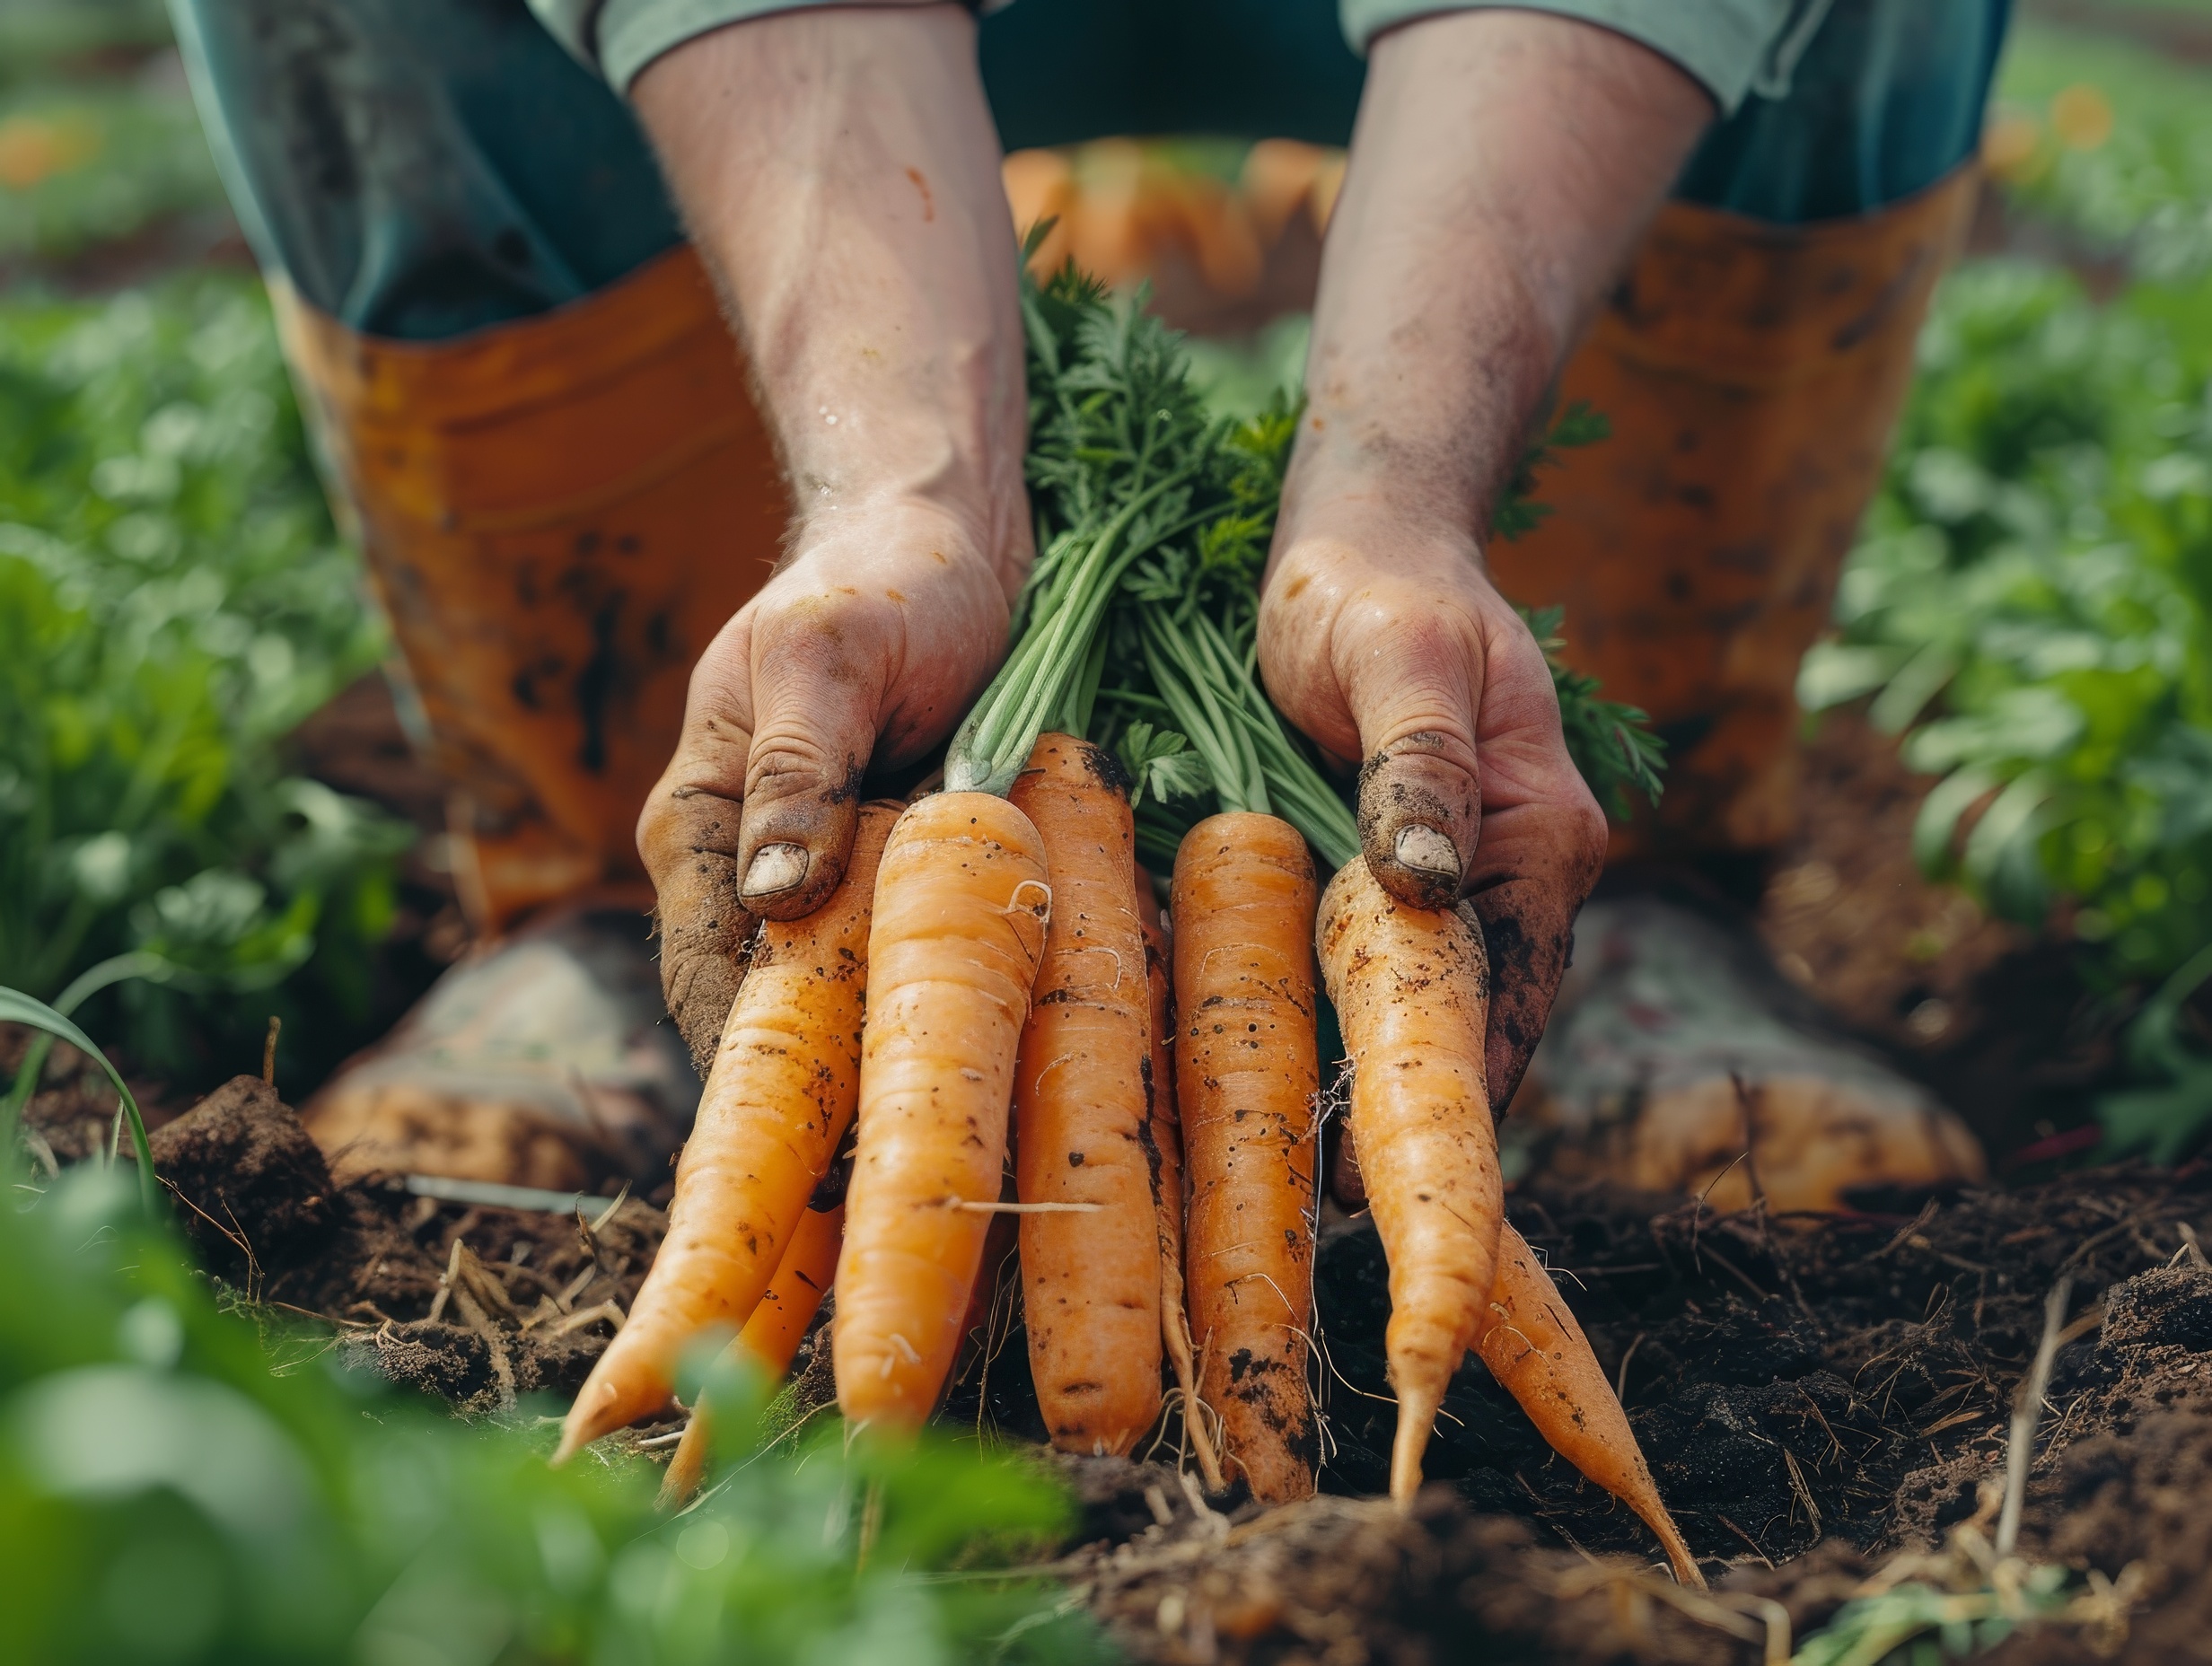 Hands pulling carrots from the carrot field